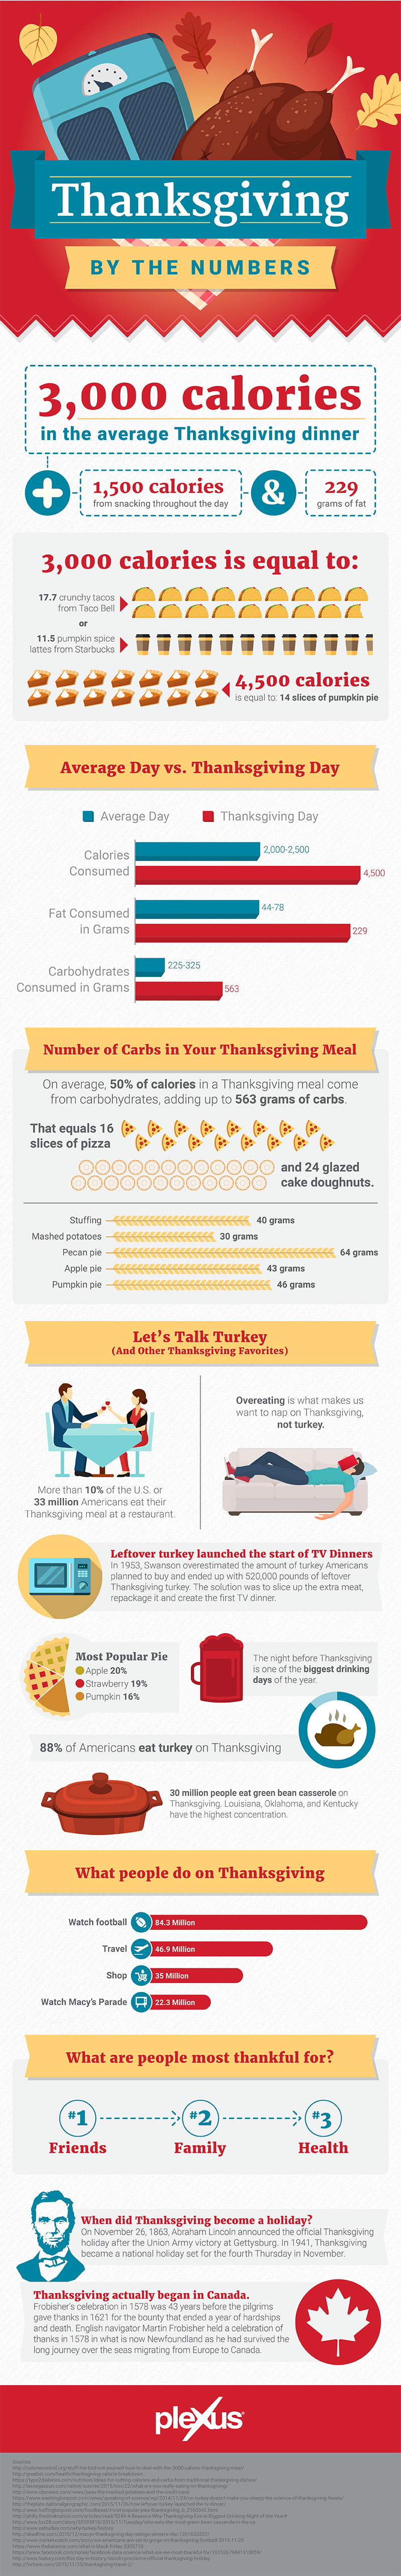 Thanksgiving By The Numbers